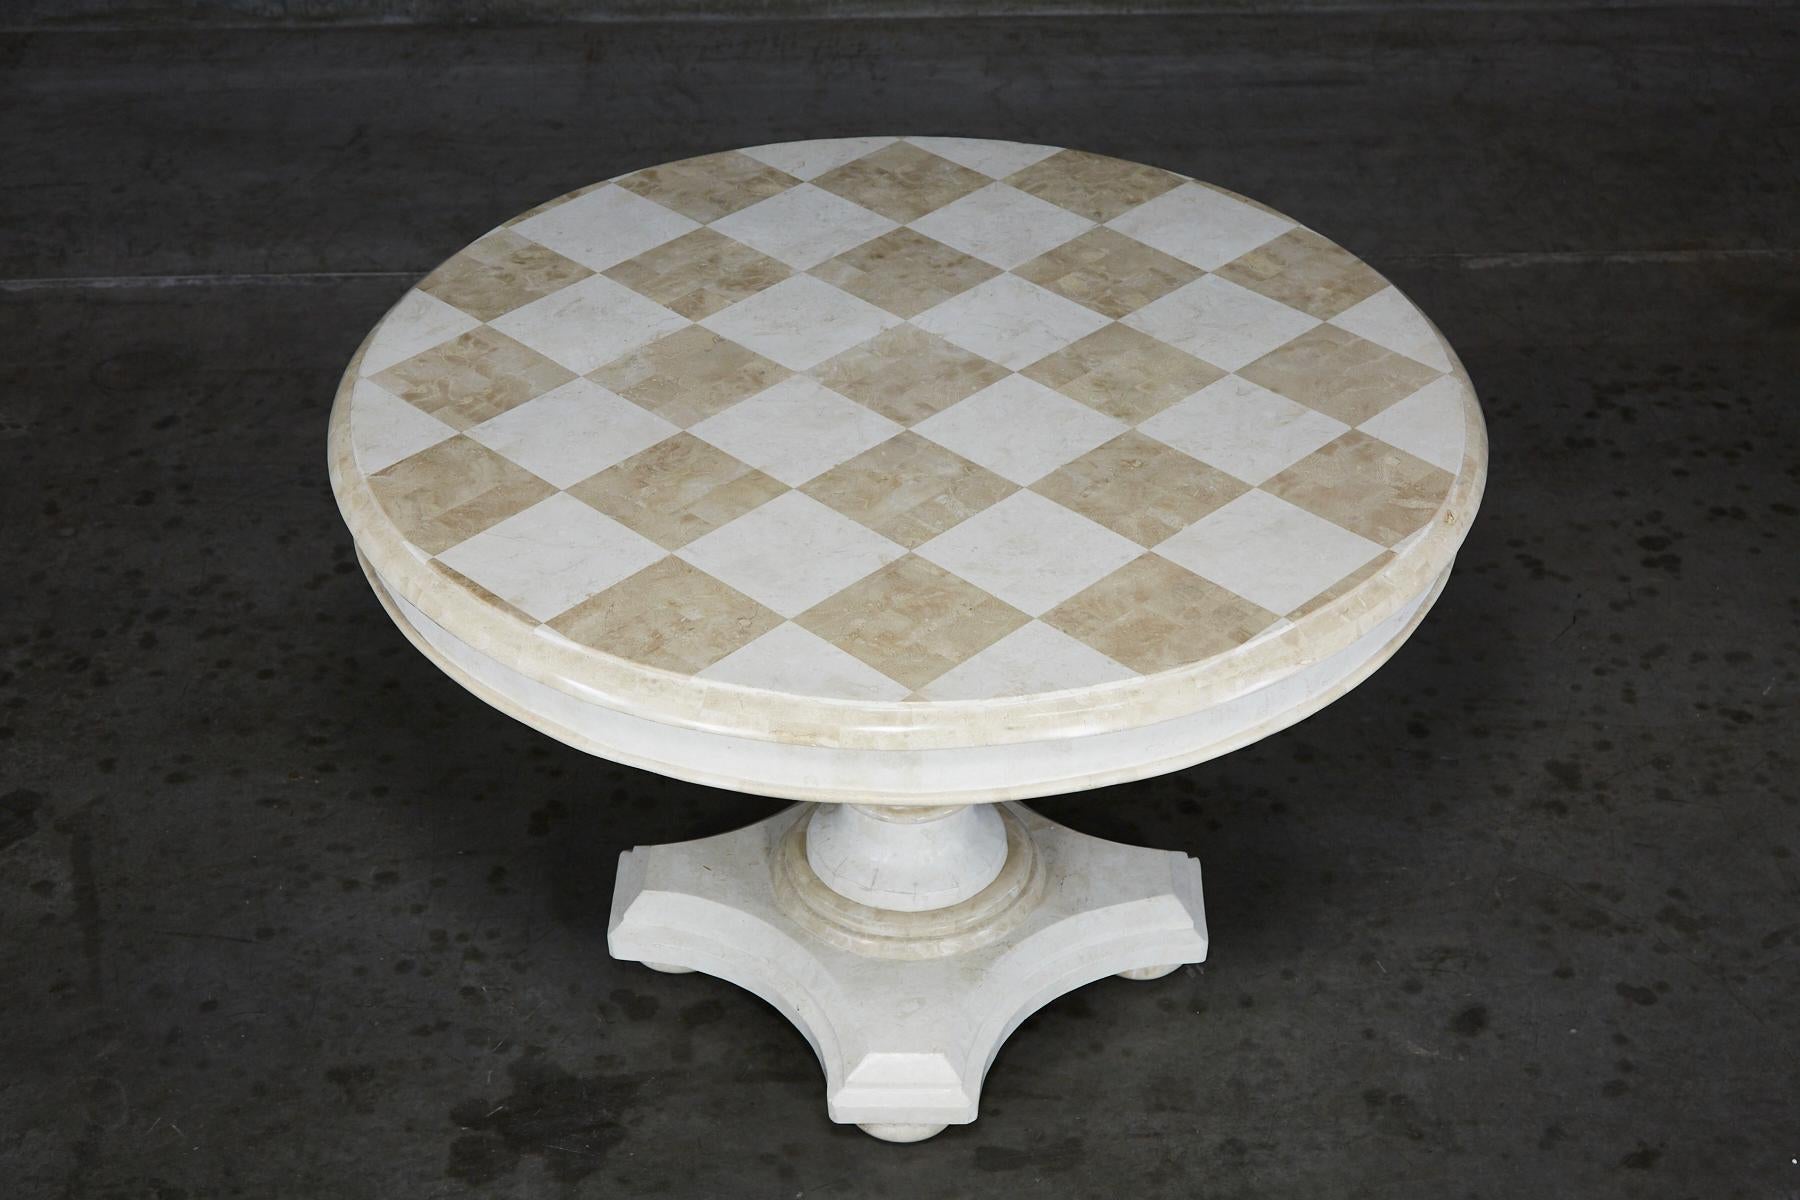 Round Pedestal Base Tessellated Stone Dining Table with Checkered Top, 1990s For Sale 3